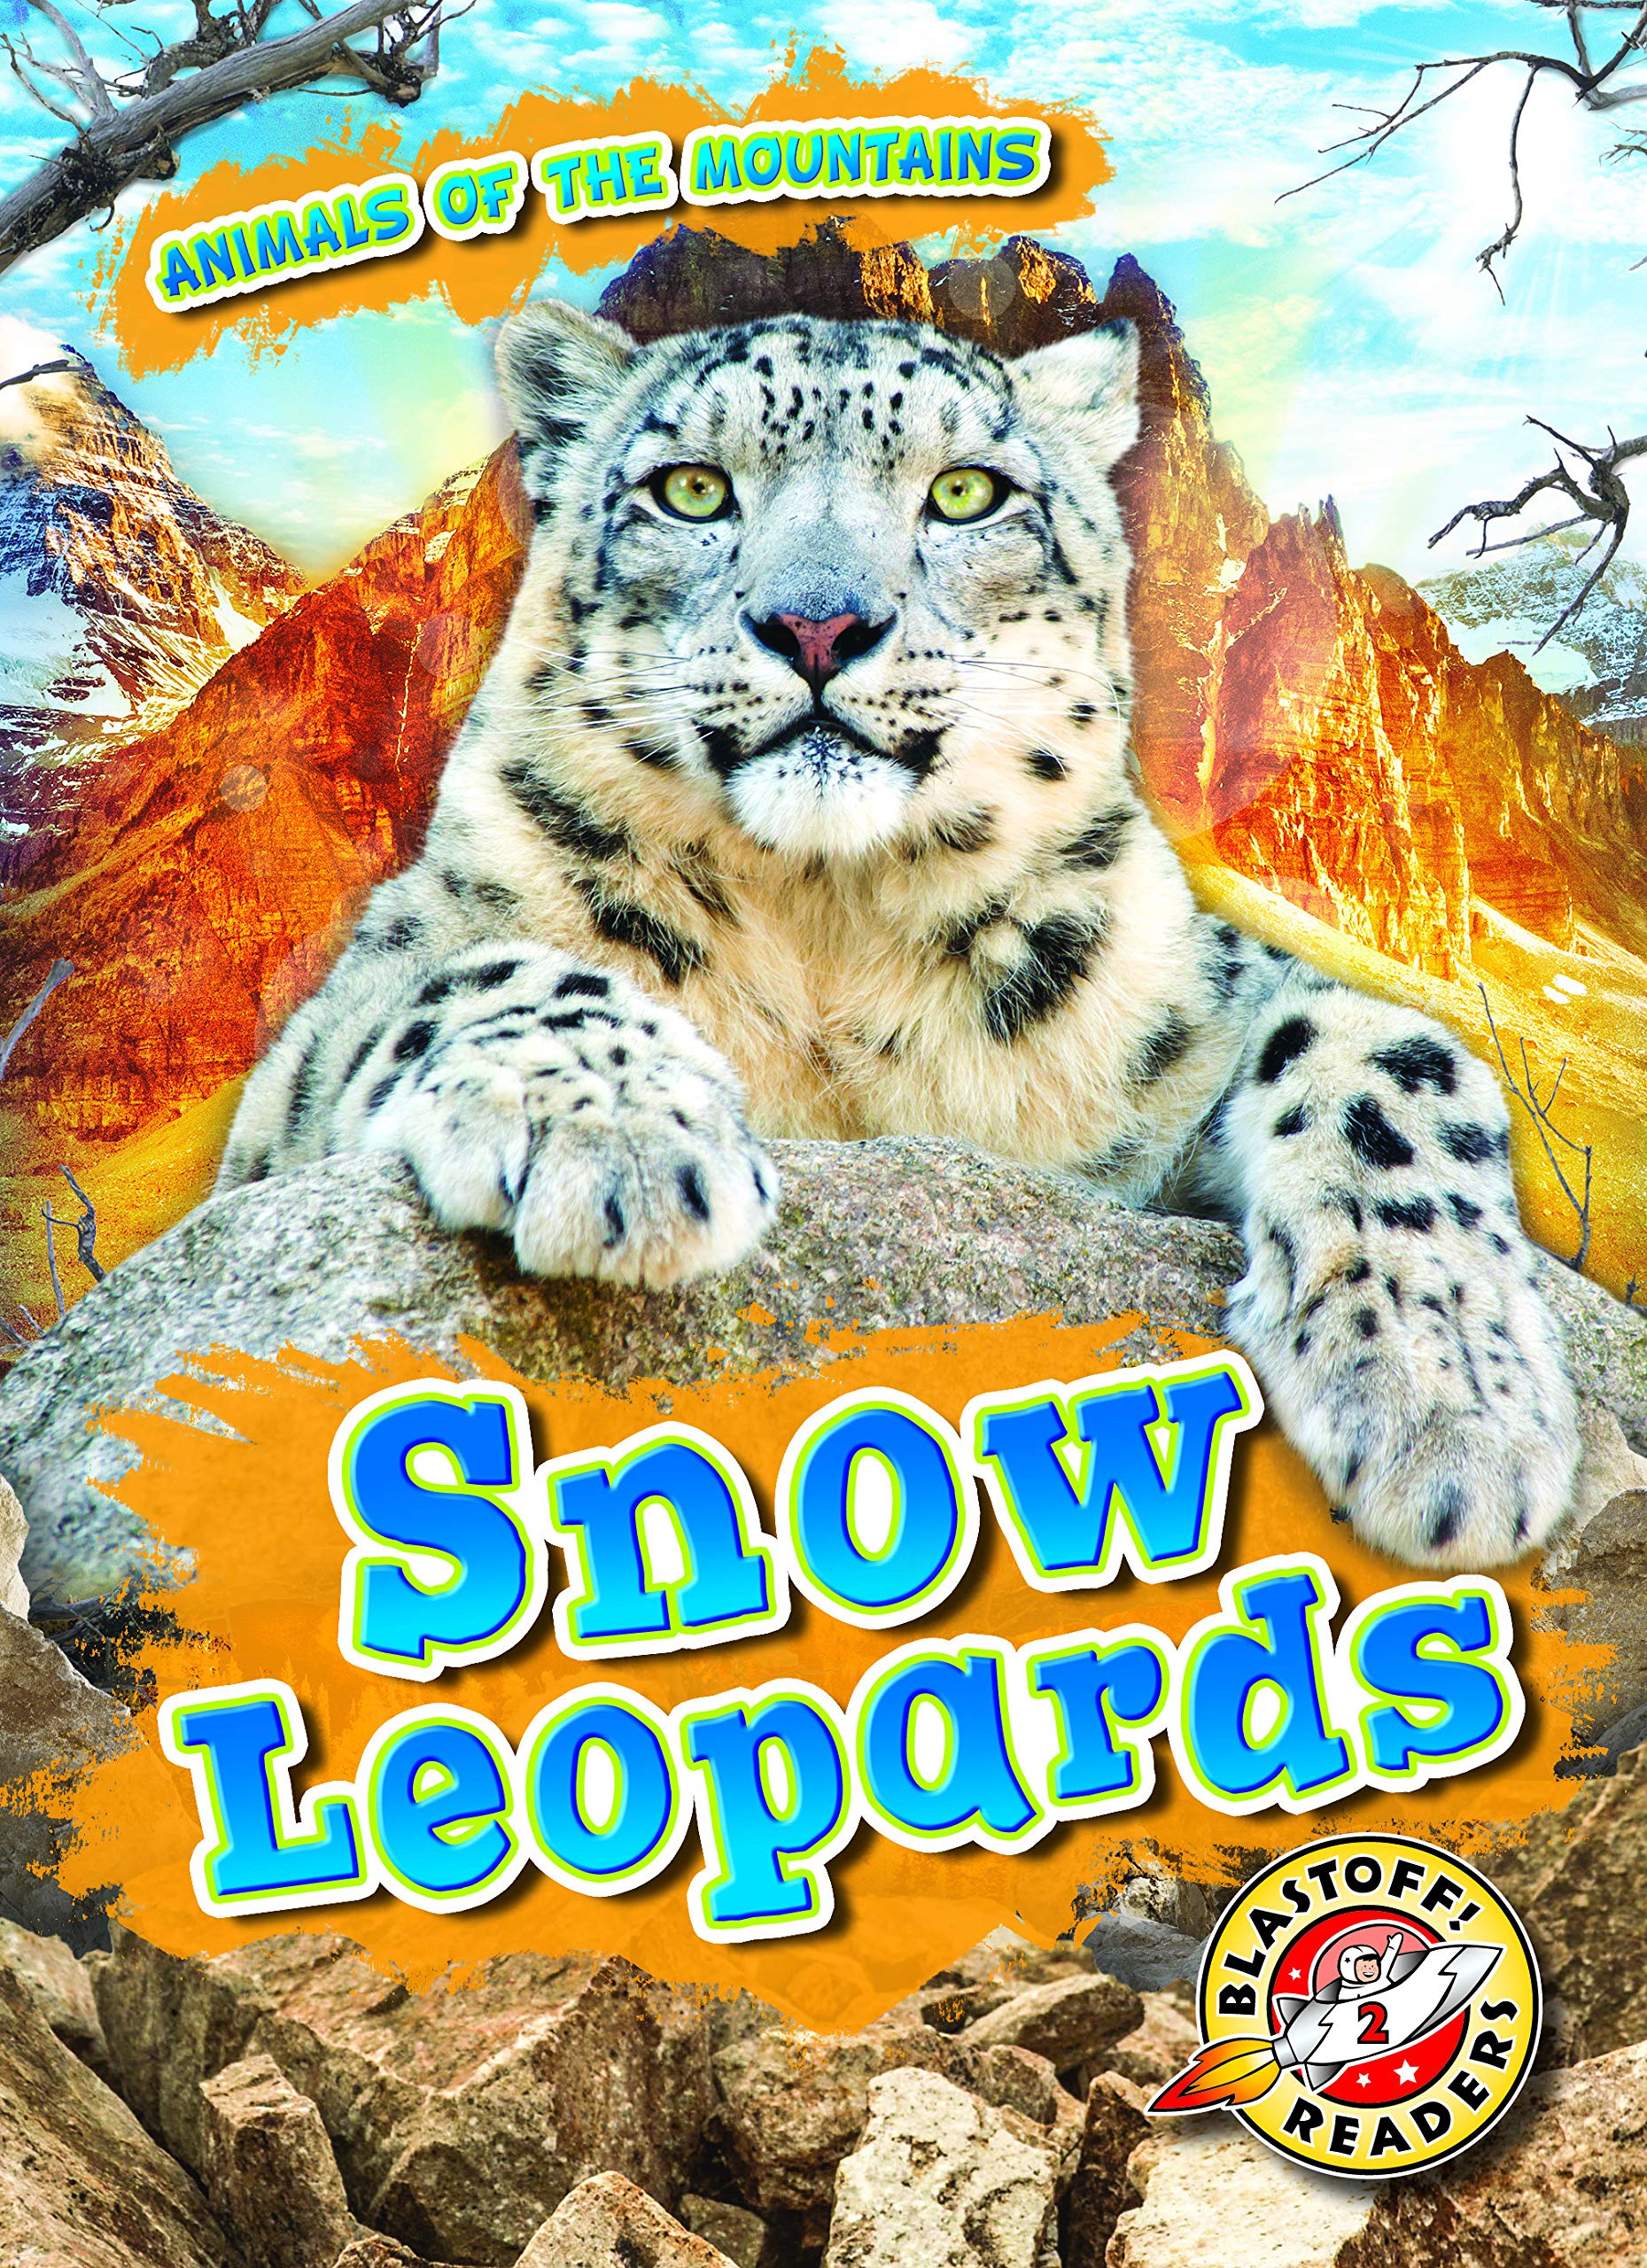 Image for "Snow Leopards"